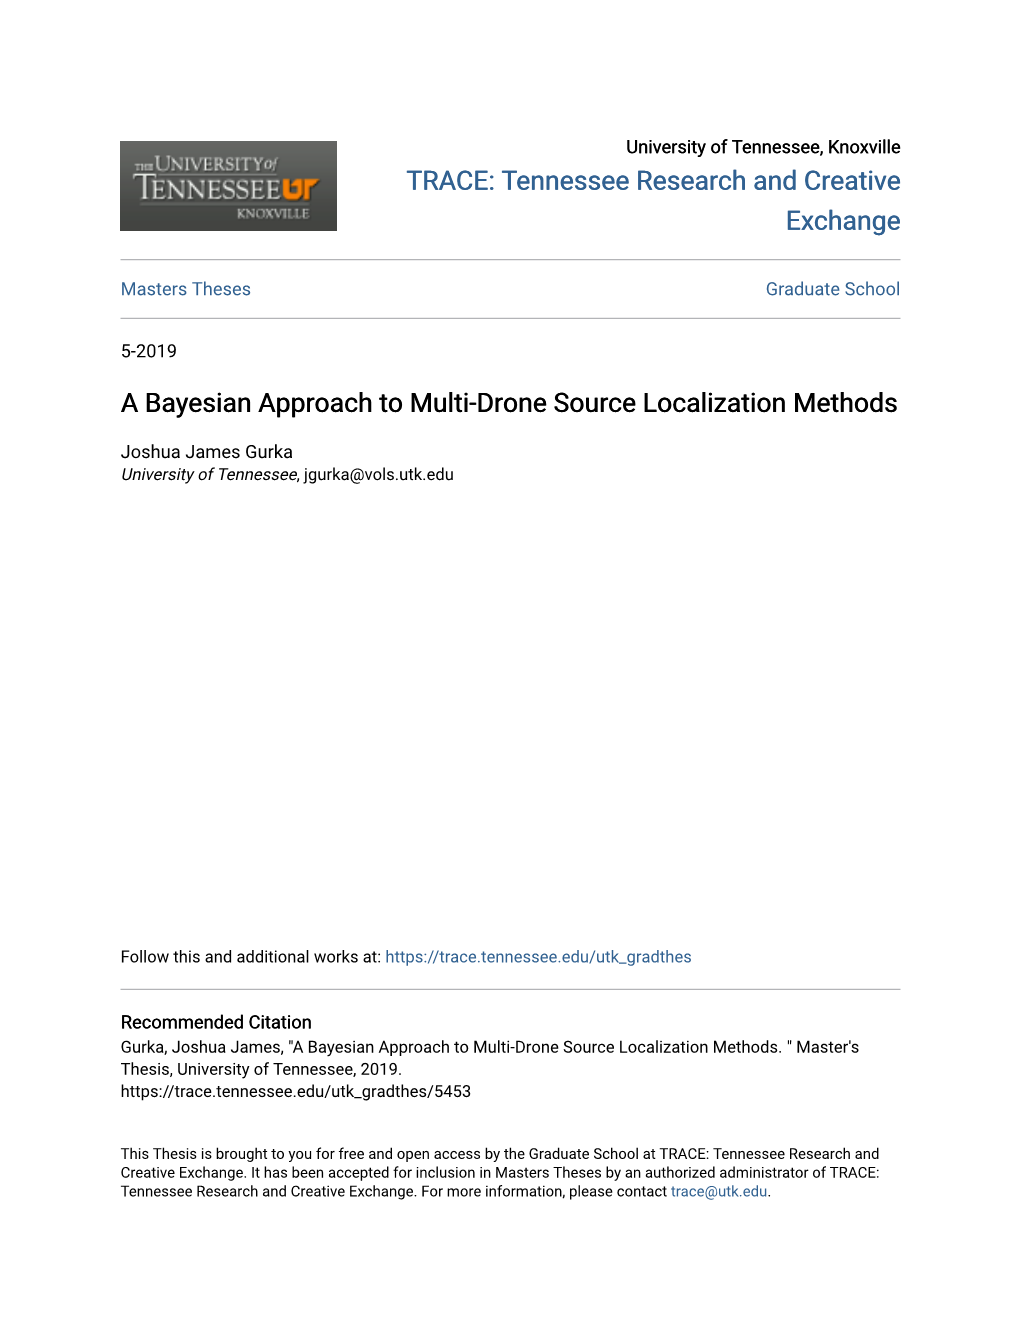 A Bayesian Approach to Multi-Drone Source Localization Methods